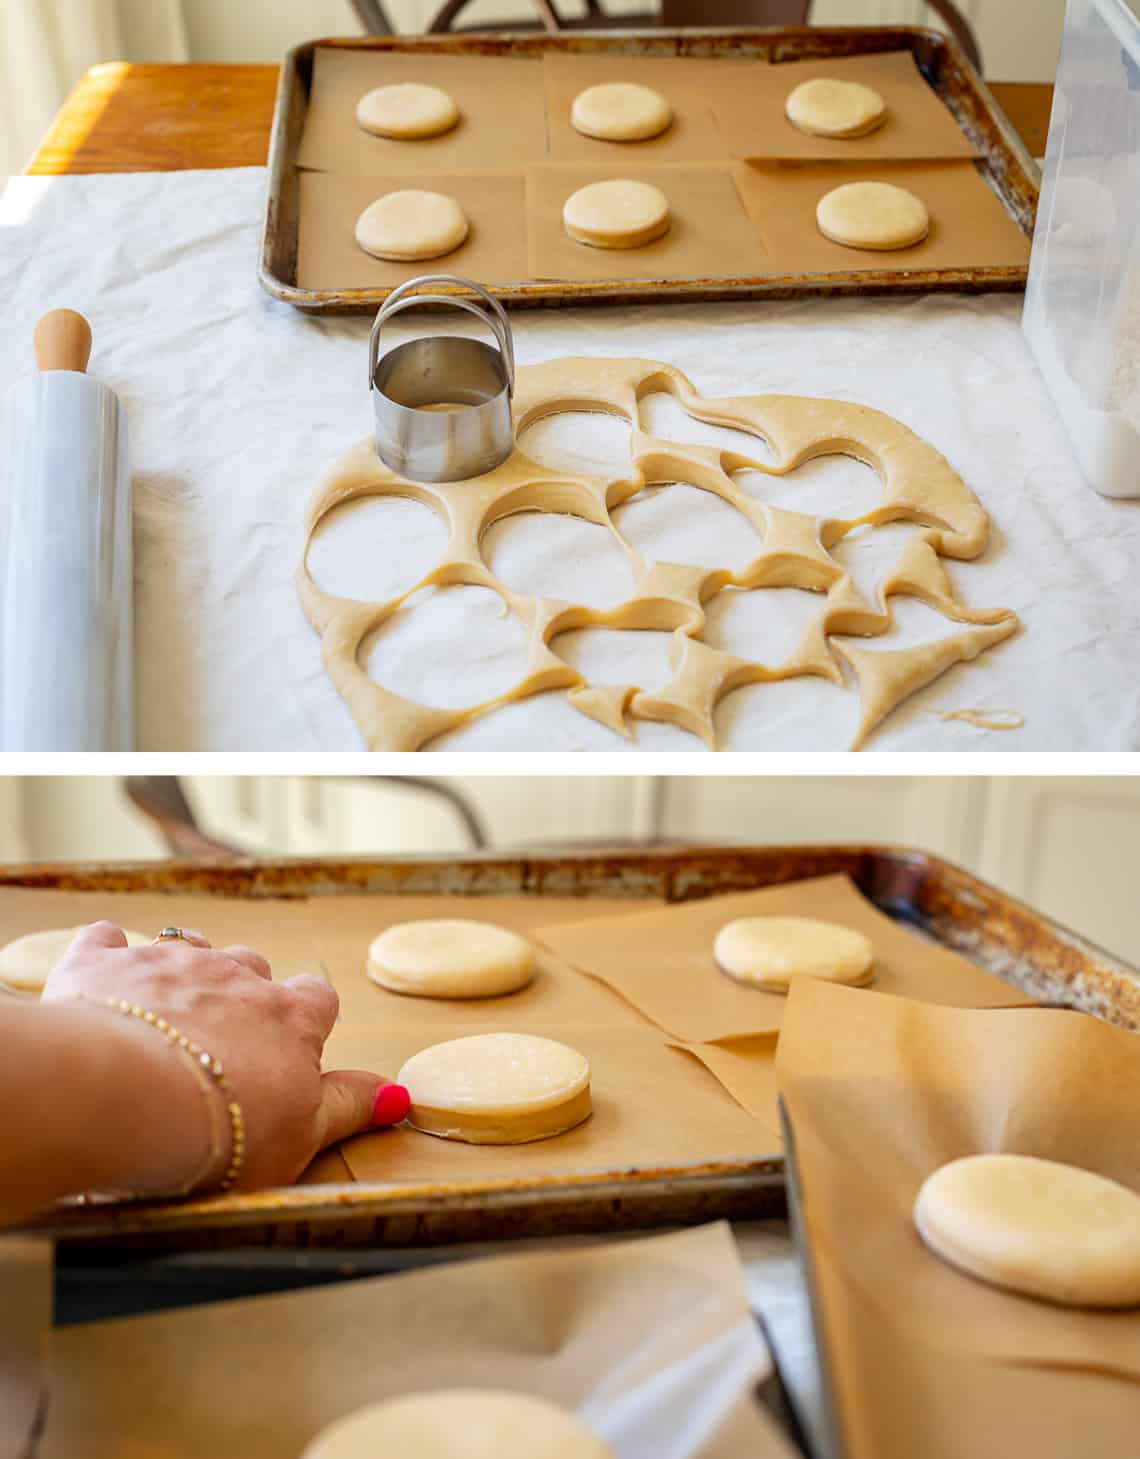 top biscuit cutter cutting donut rounds, bottom donut rounds on parchment paper on a baking sheet.